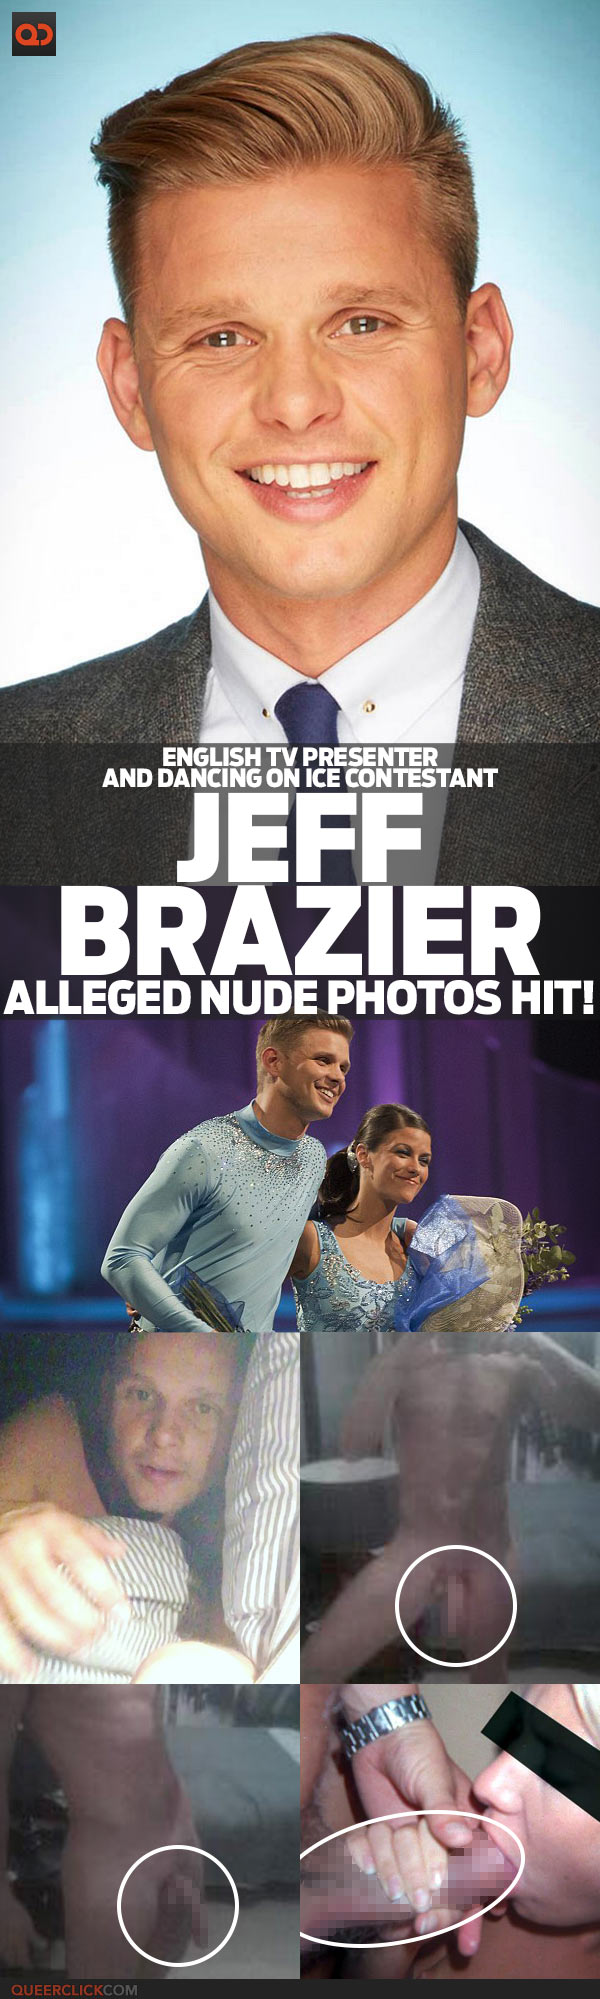 Jeff Brazier, English TV Presenter And Dancing On Ice Contestant, Alleged Nude Photos Hit!